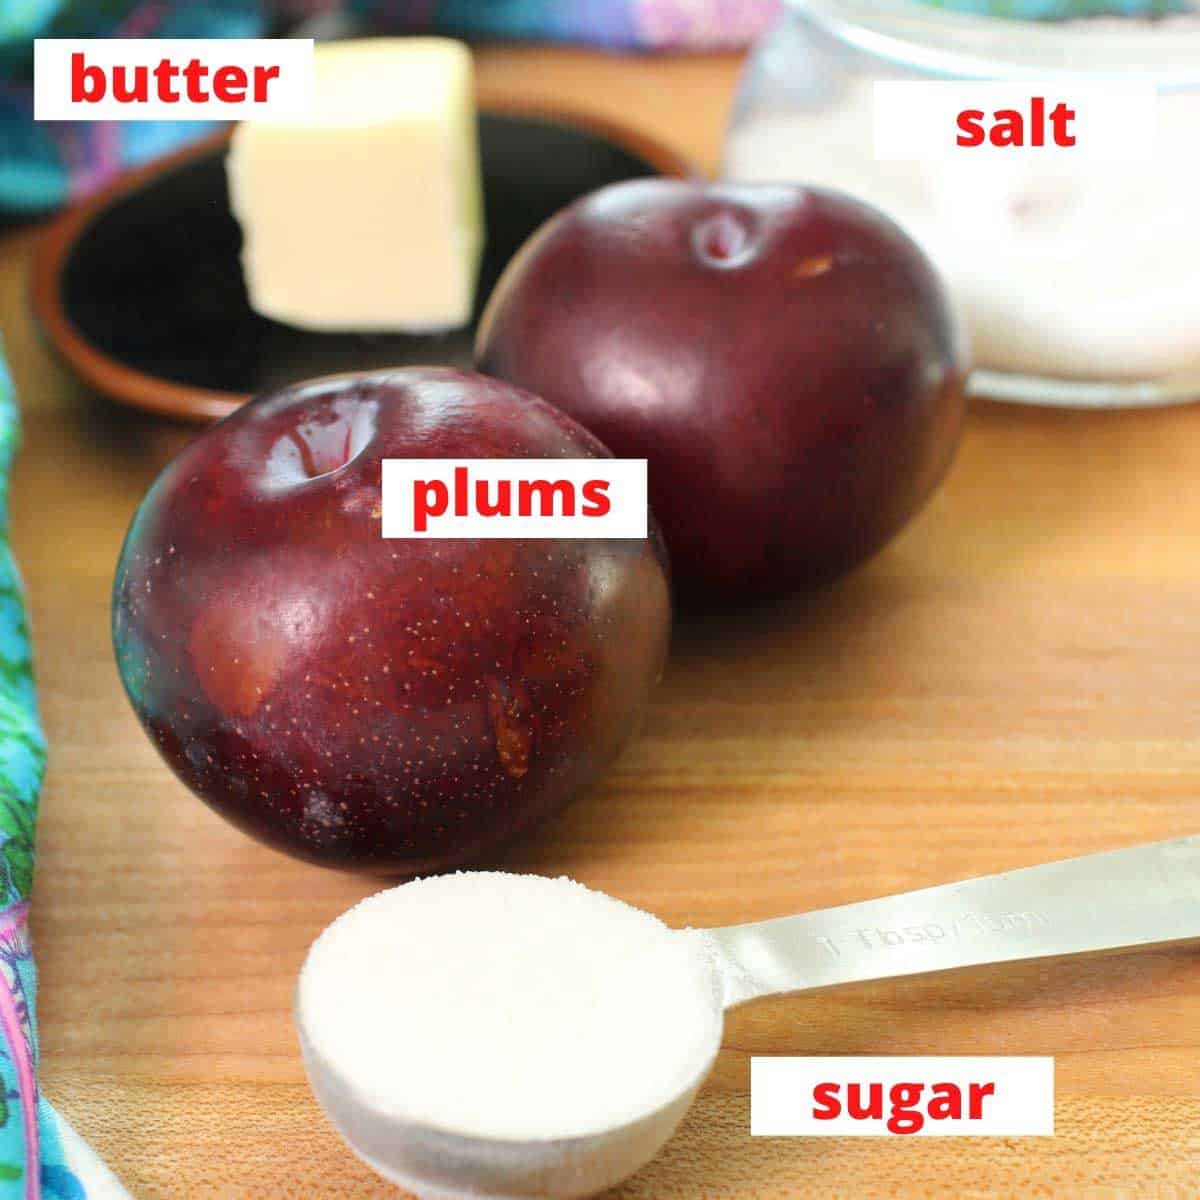 the ingredients for caramelized plums on a brown table including 2 plums, sugar, and butter.